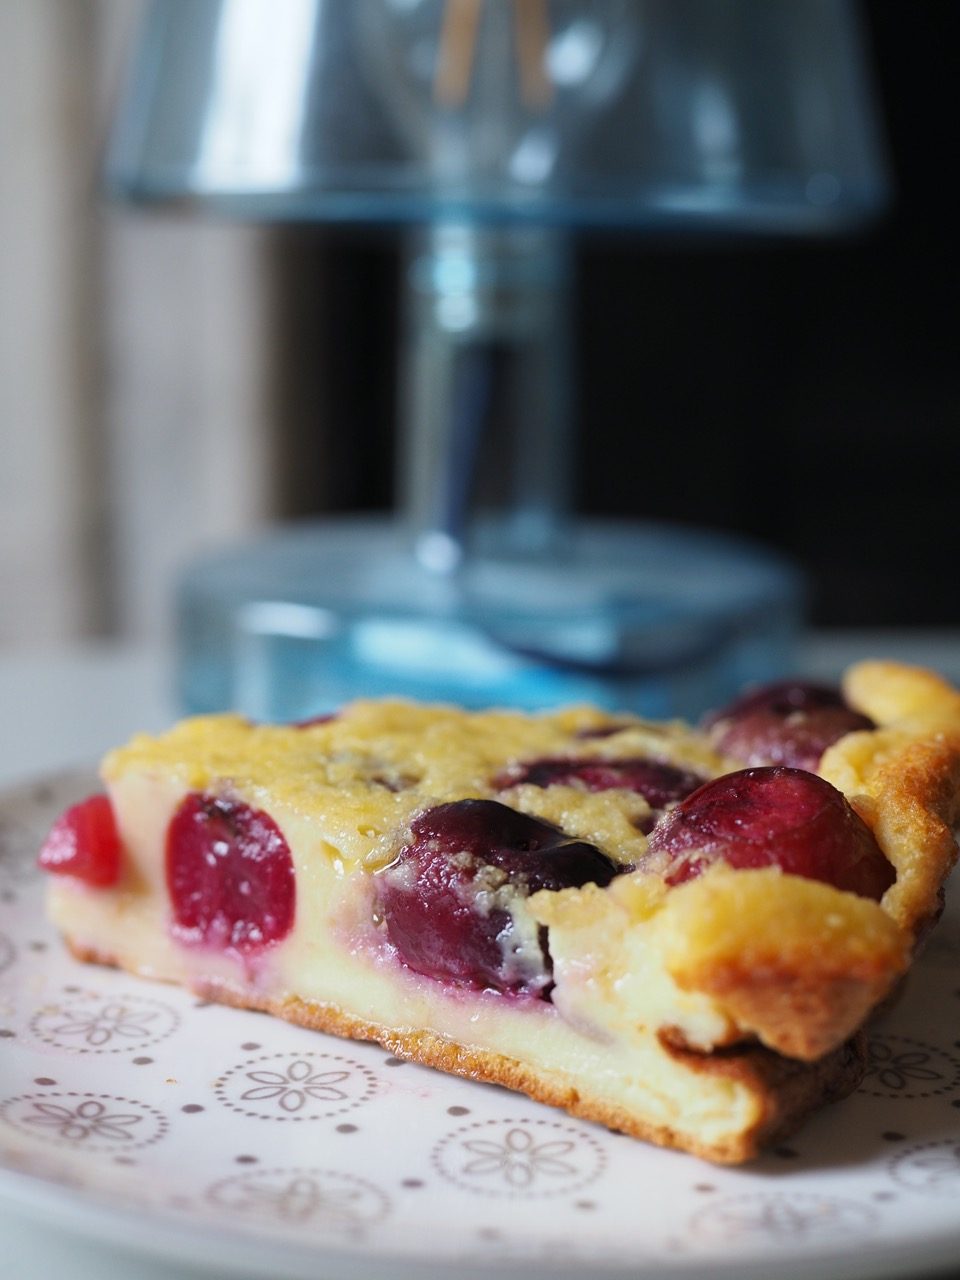 Easy recipe of a French cherry cake!